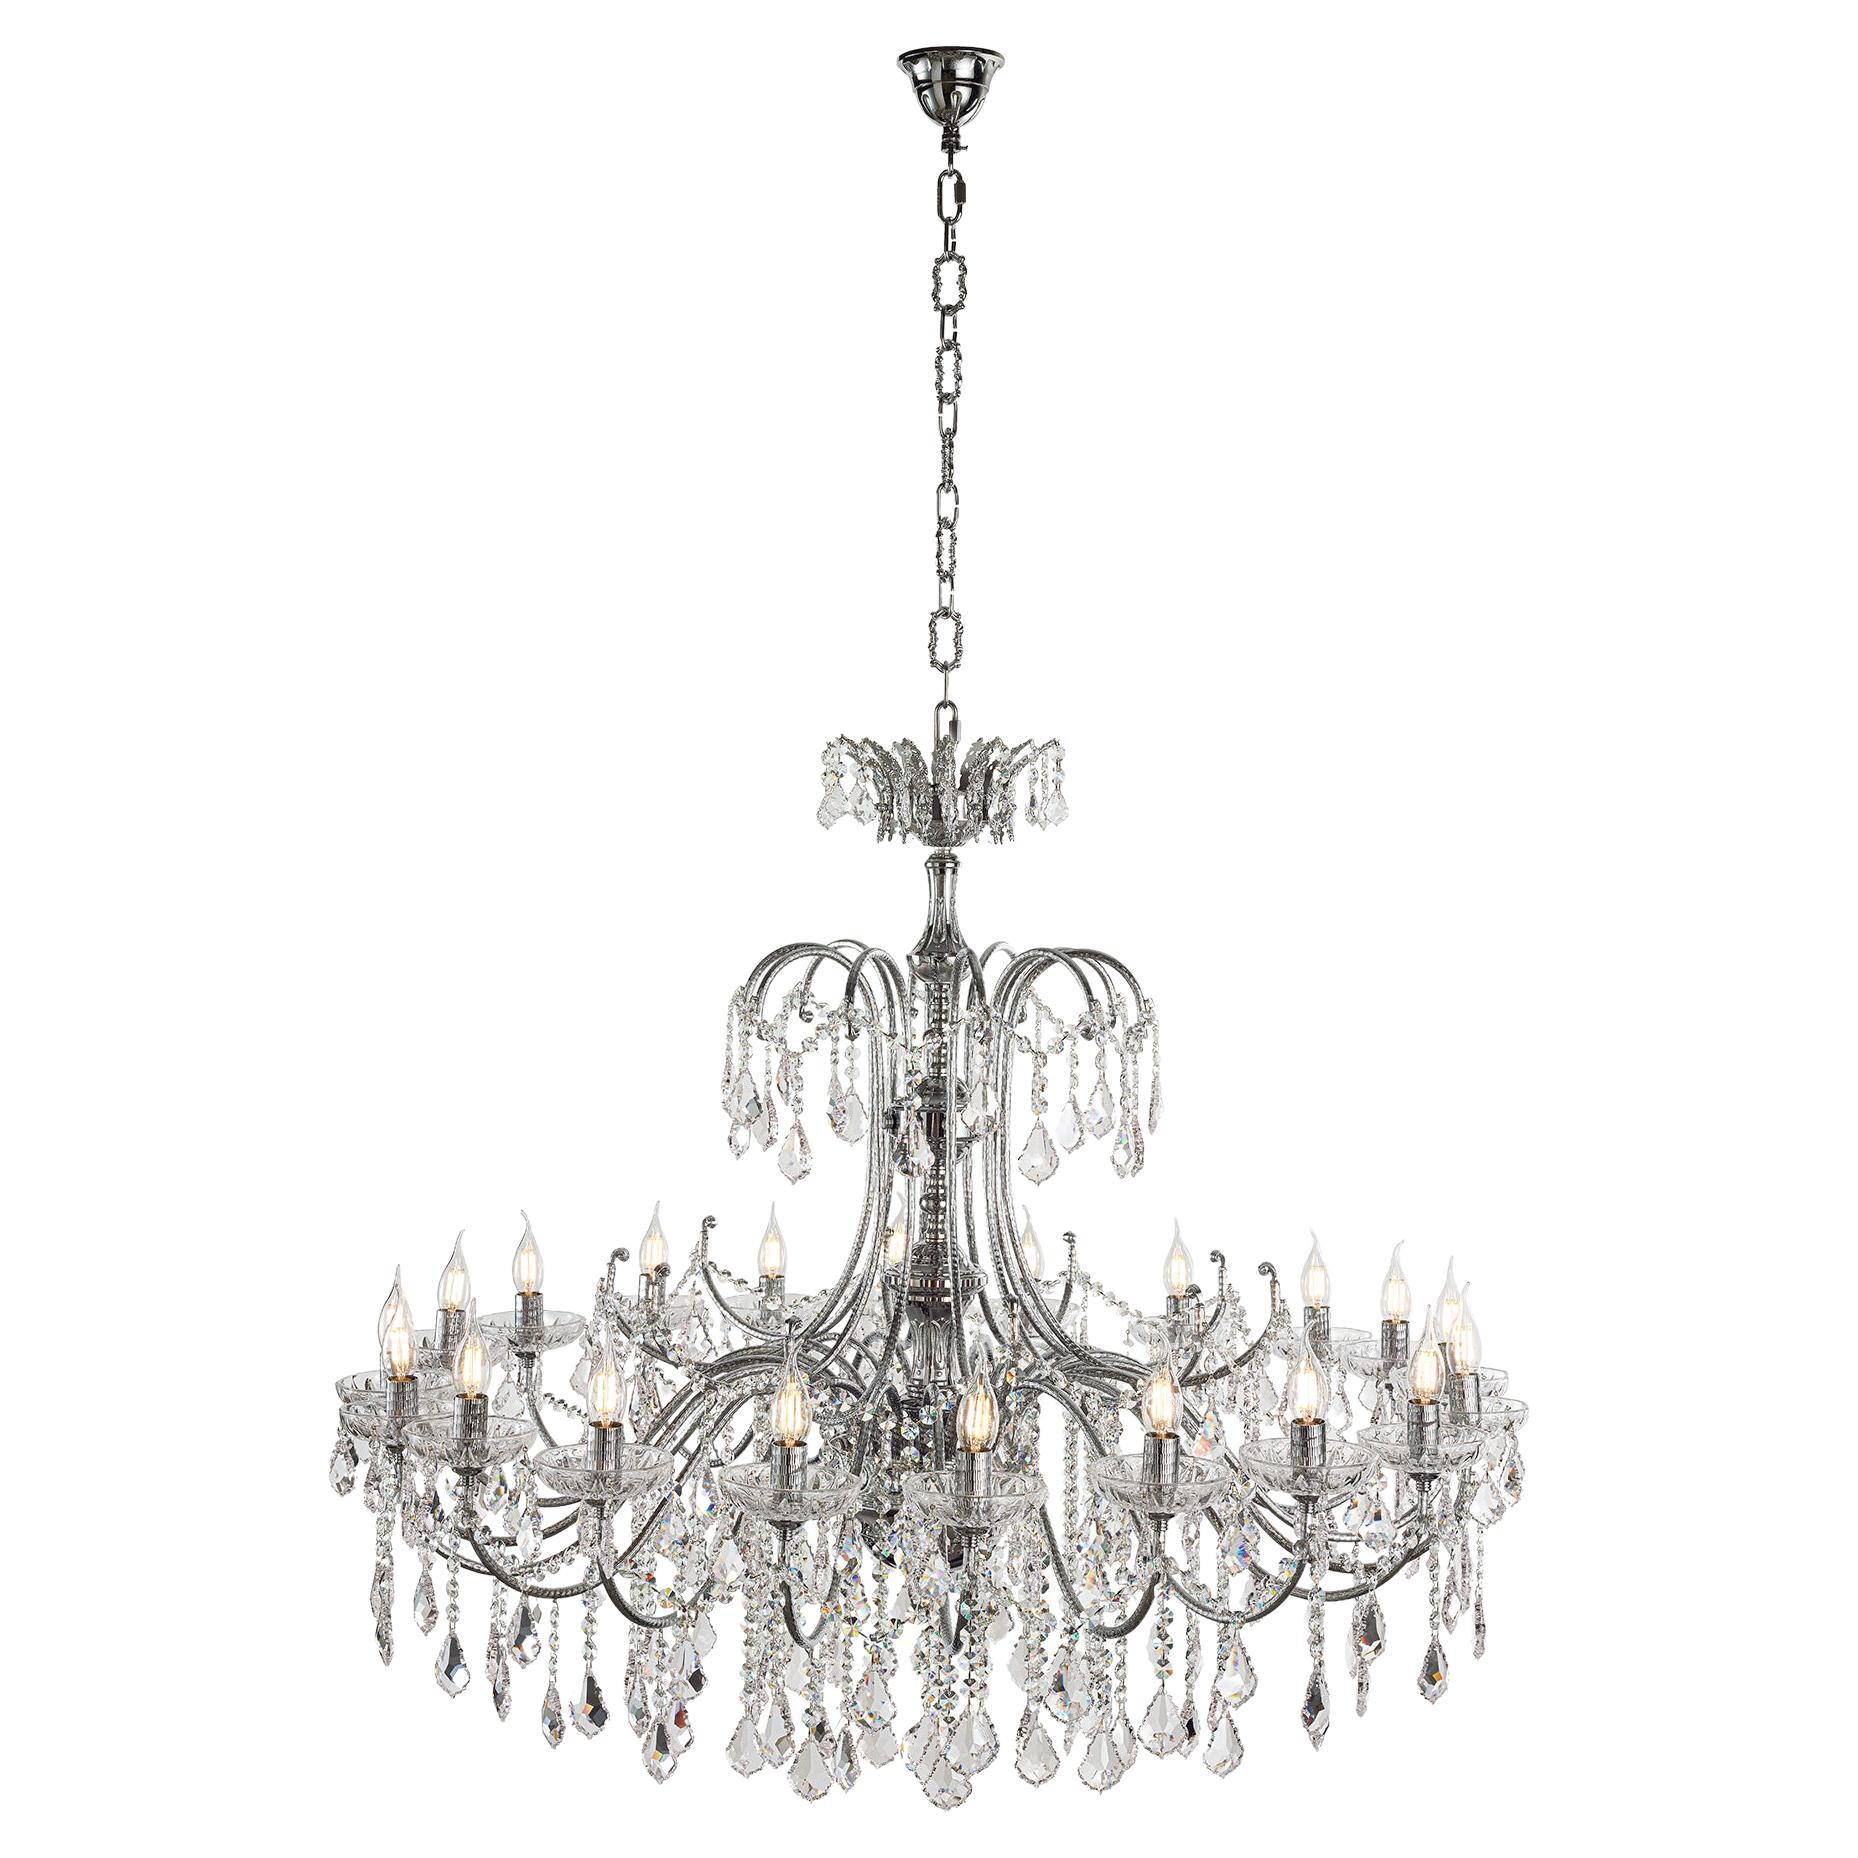 20 Lights Chandelier in Polished Chrome Finish by Modenese Gastone